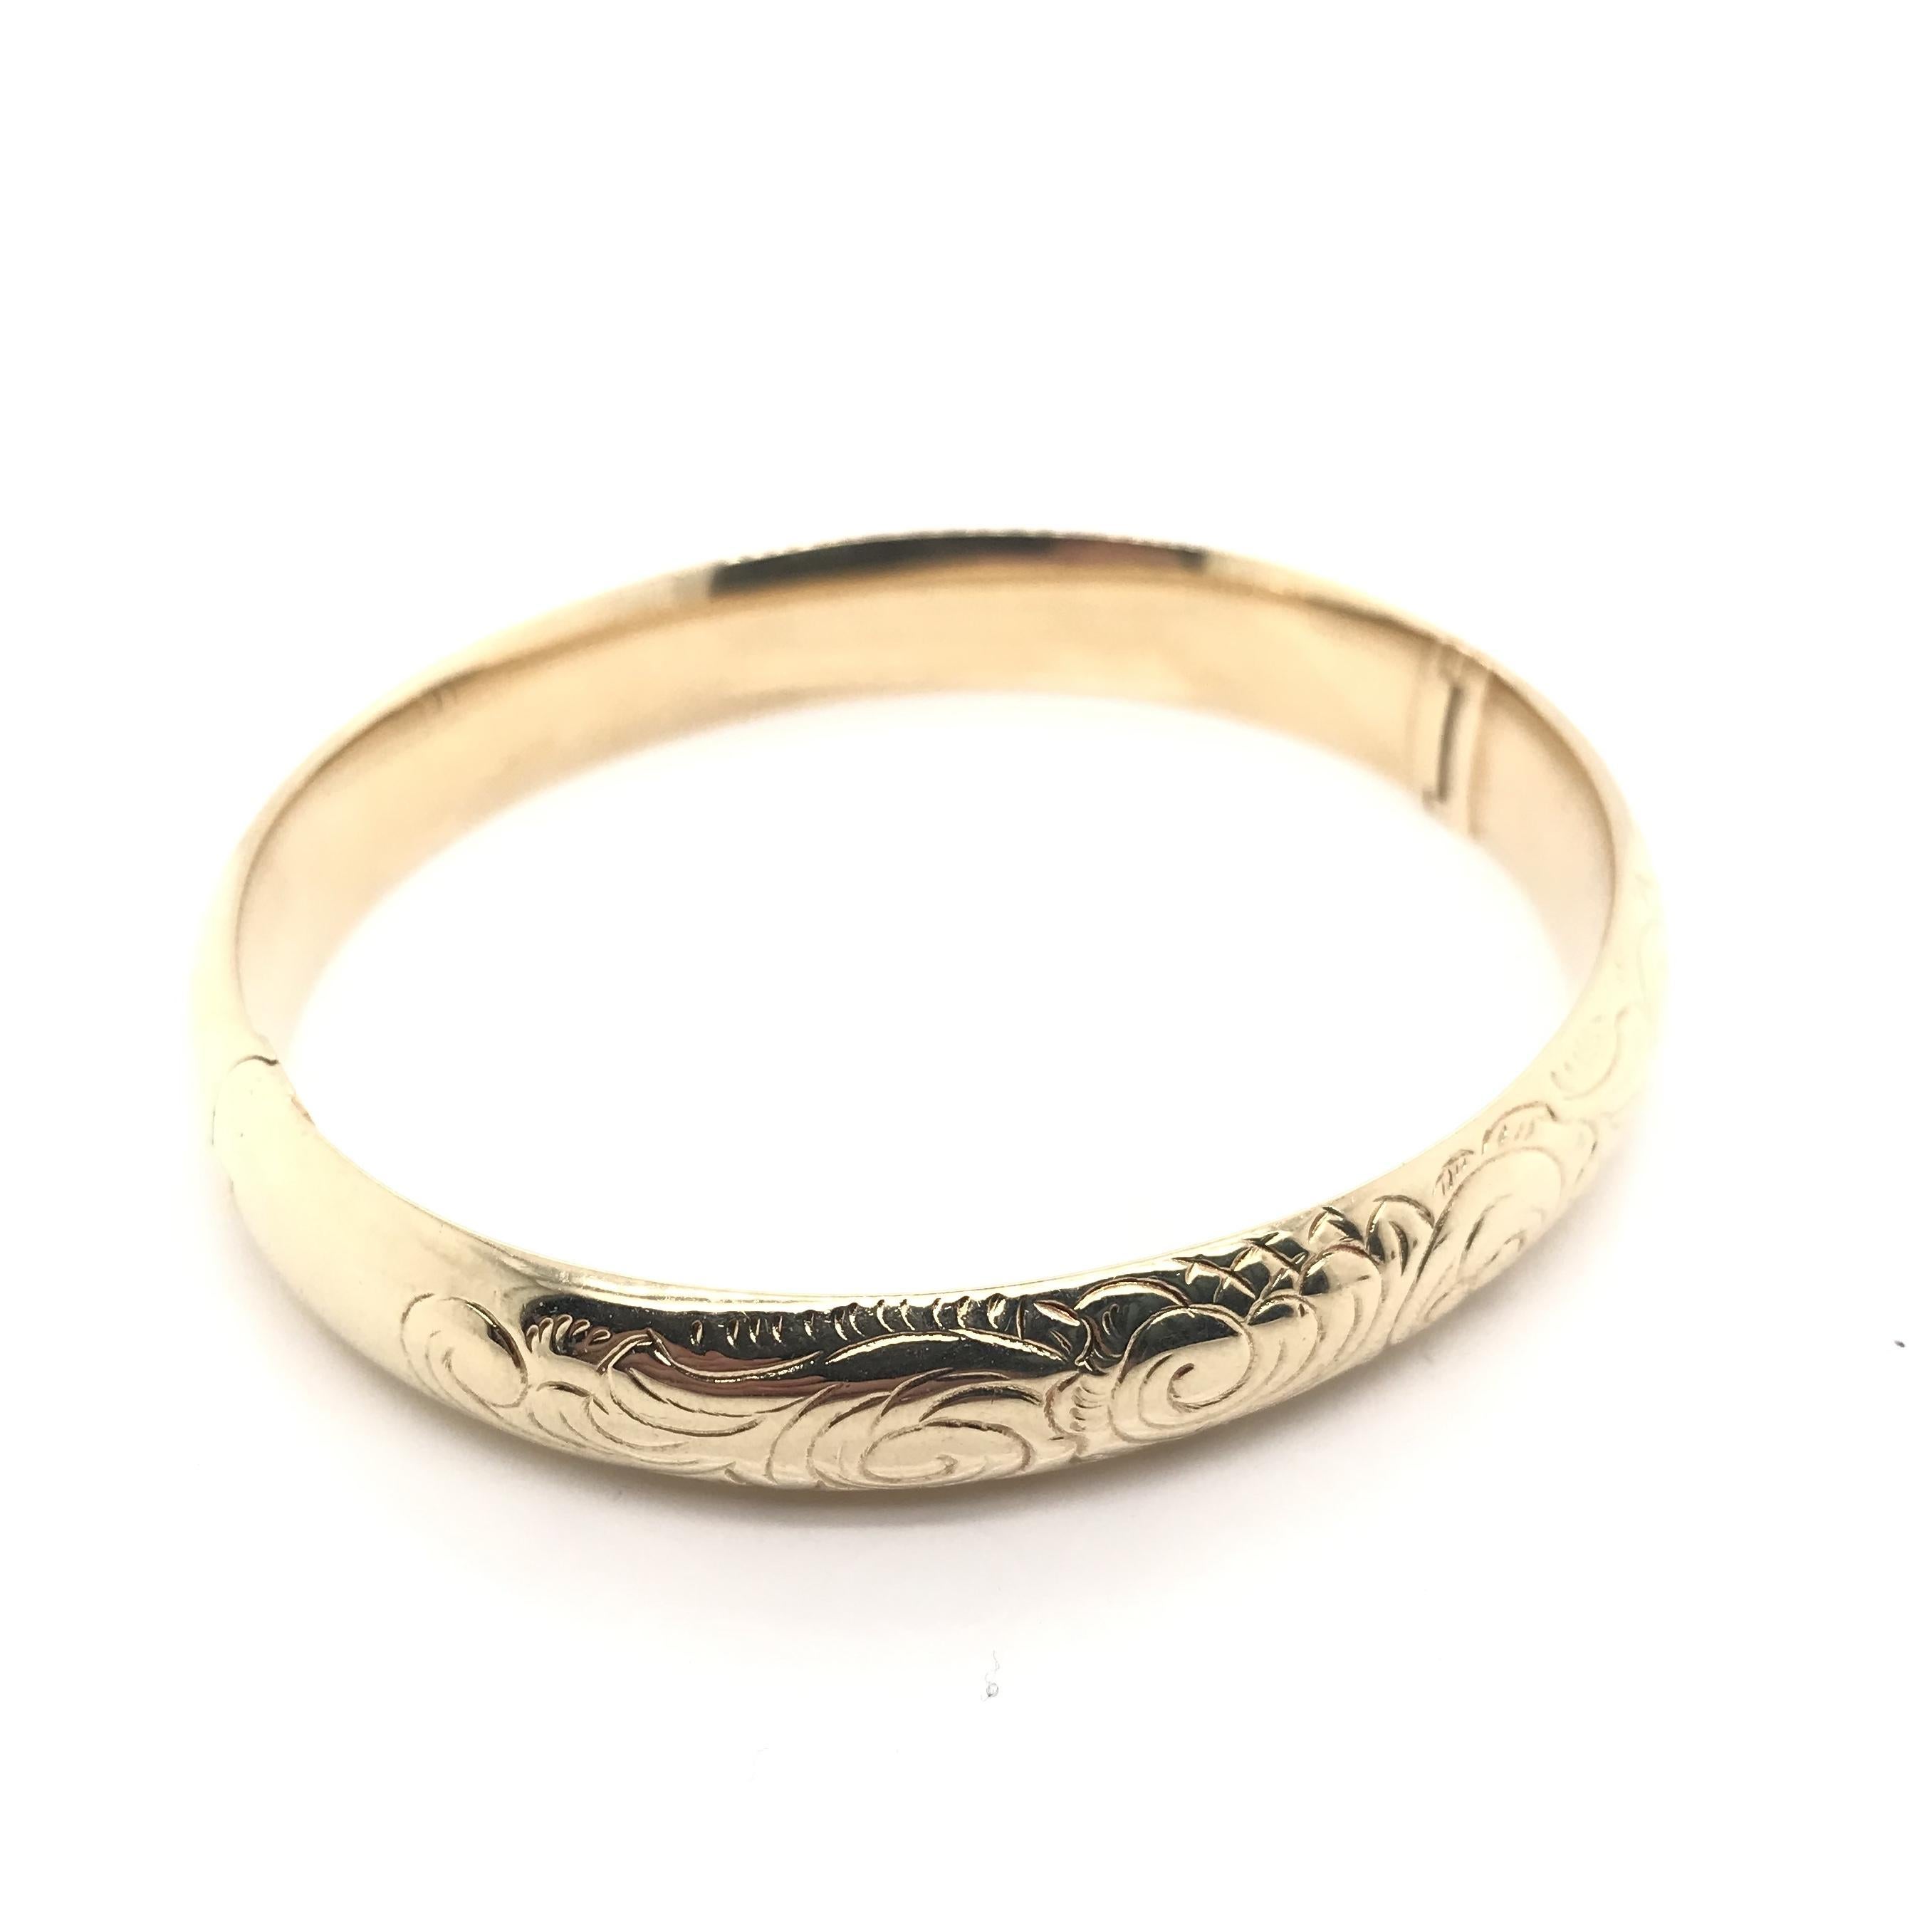 Gold bangle bracelets have been a jewelry staple from the very beginning but we estimate this piece was crafted sometime after the Mid Century design period (1970-1990). The bangle’s hallmarks suggest it is most likely European in origin and is 14K